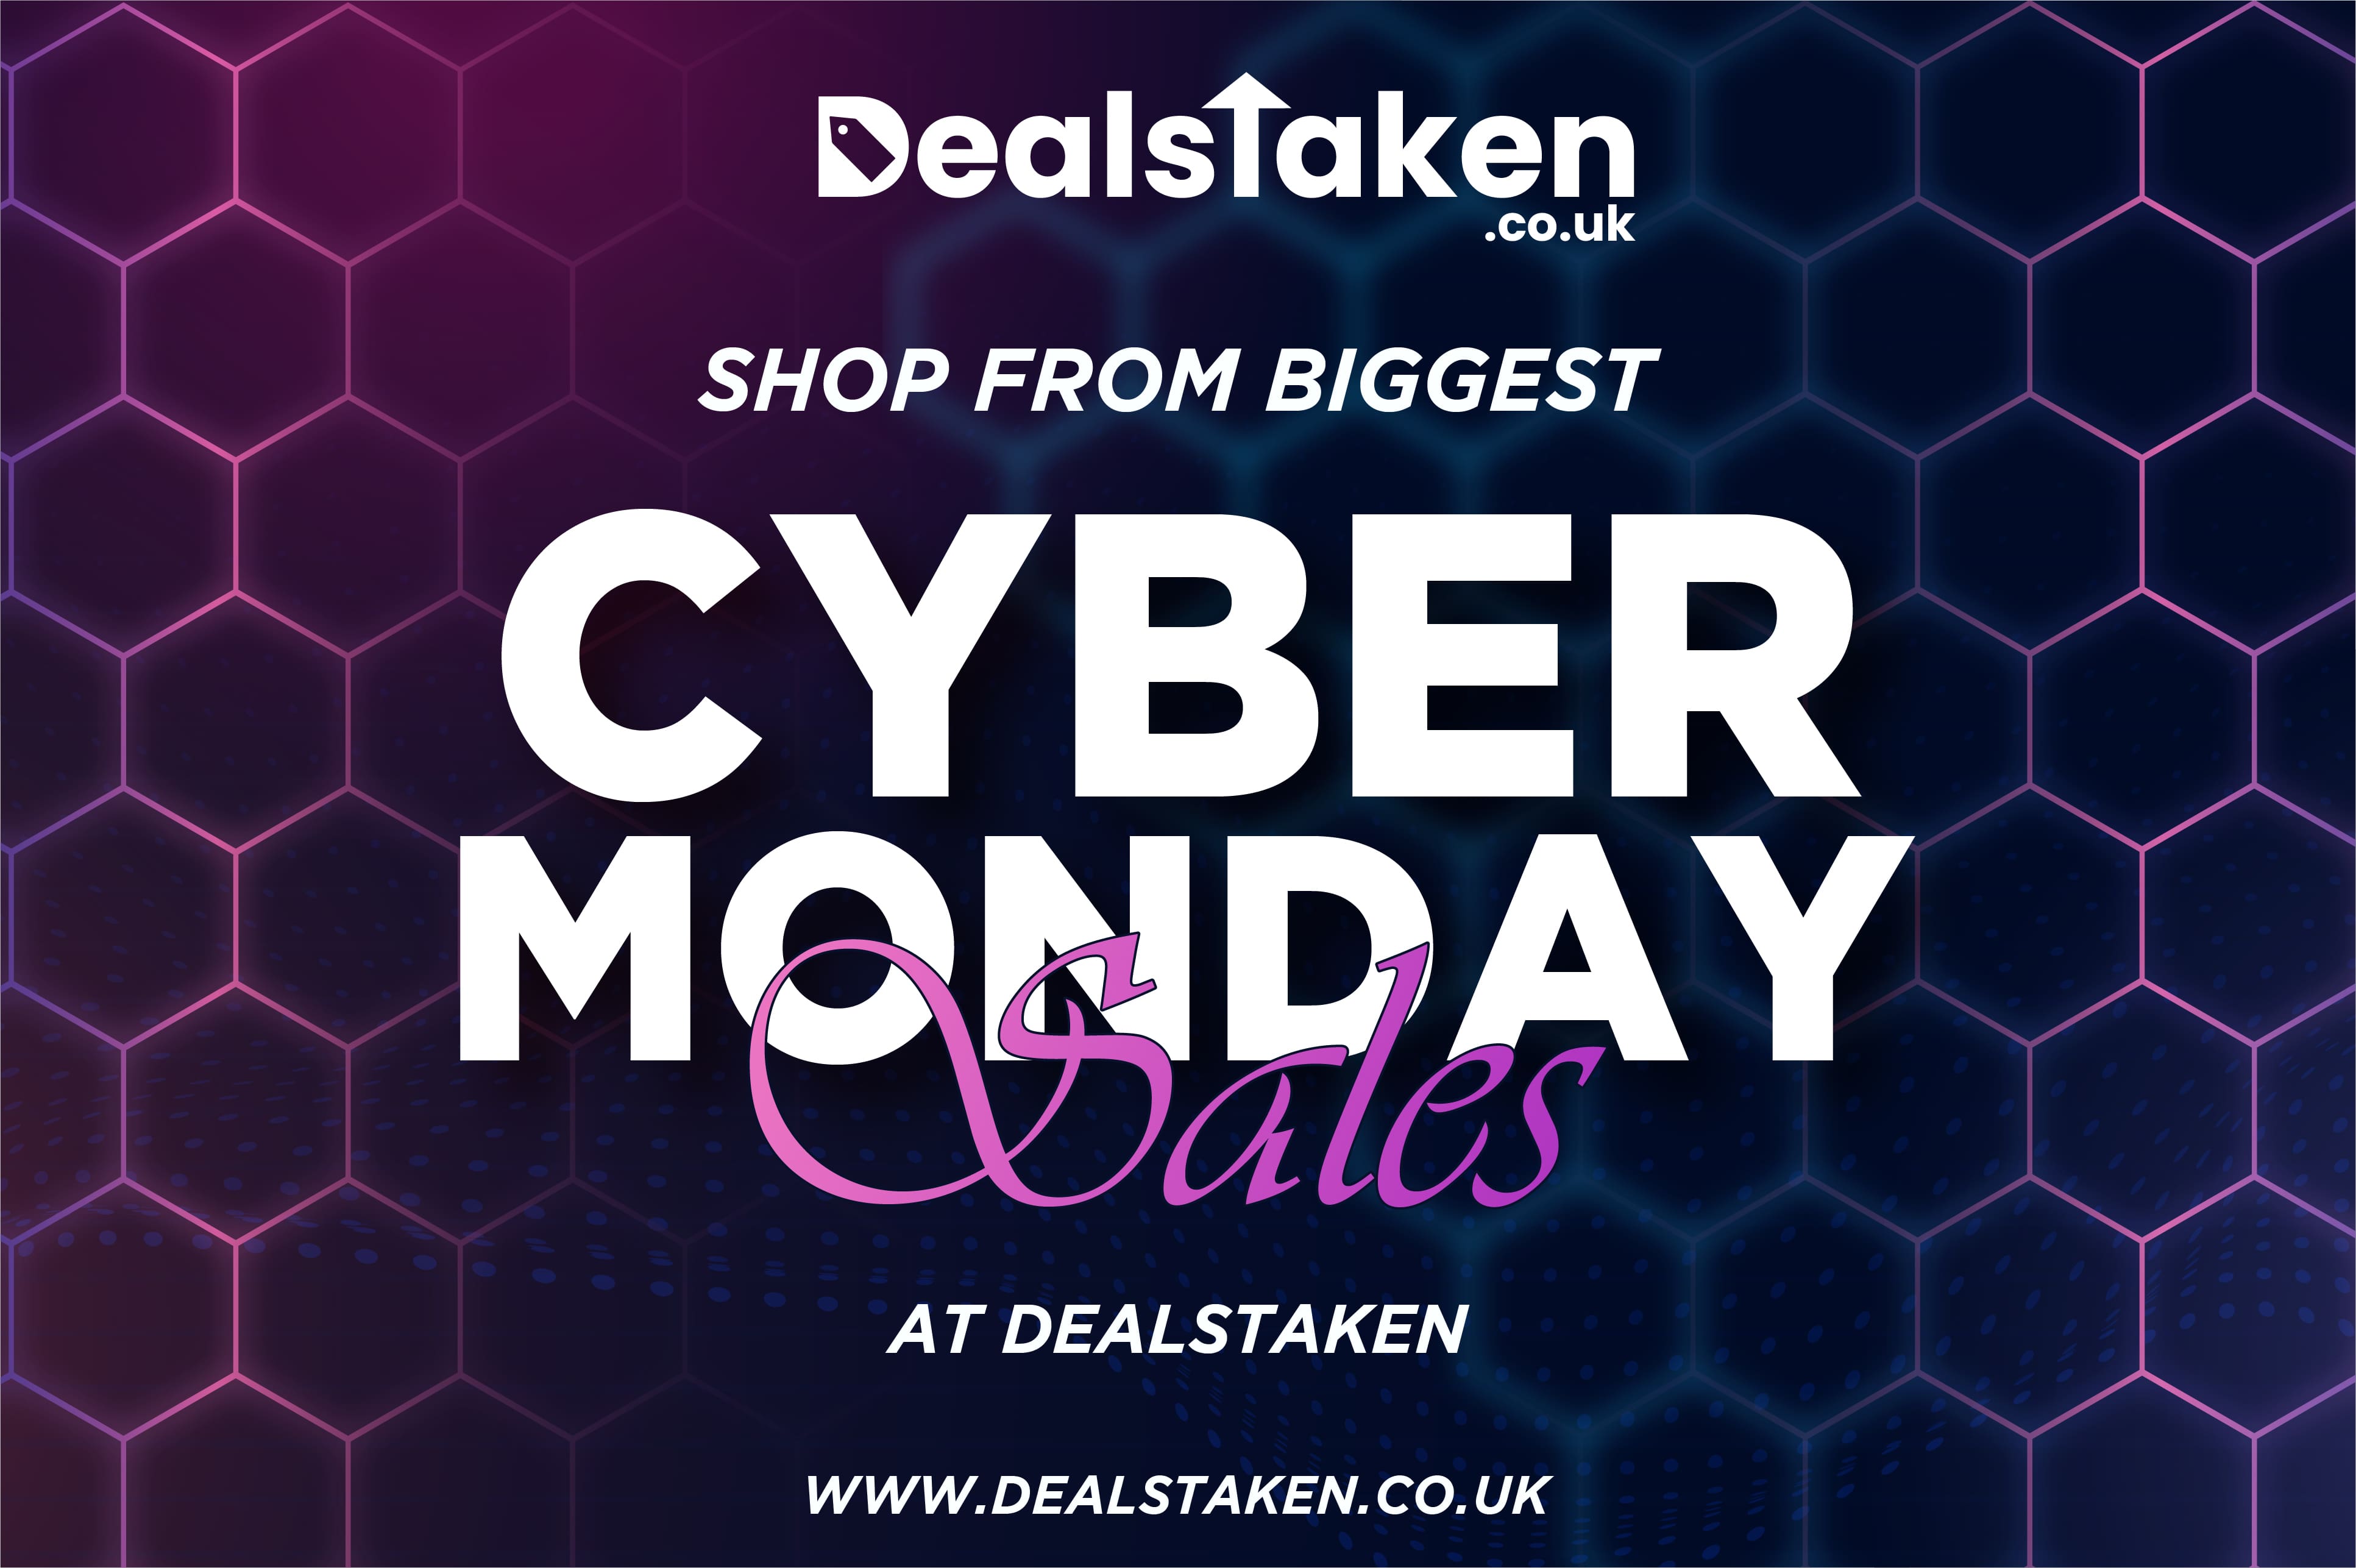 shop-from-biggest-cyber-monday-sales-at-dealstaken